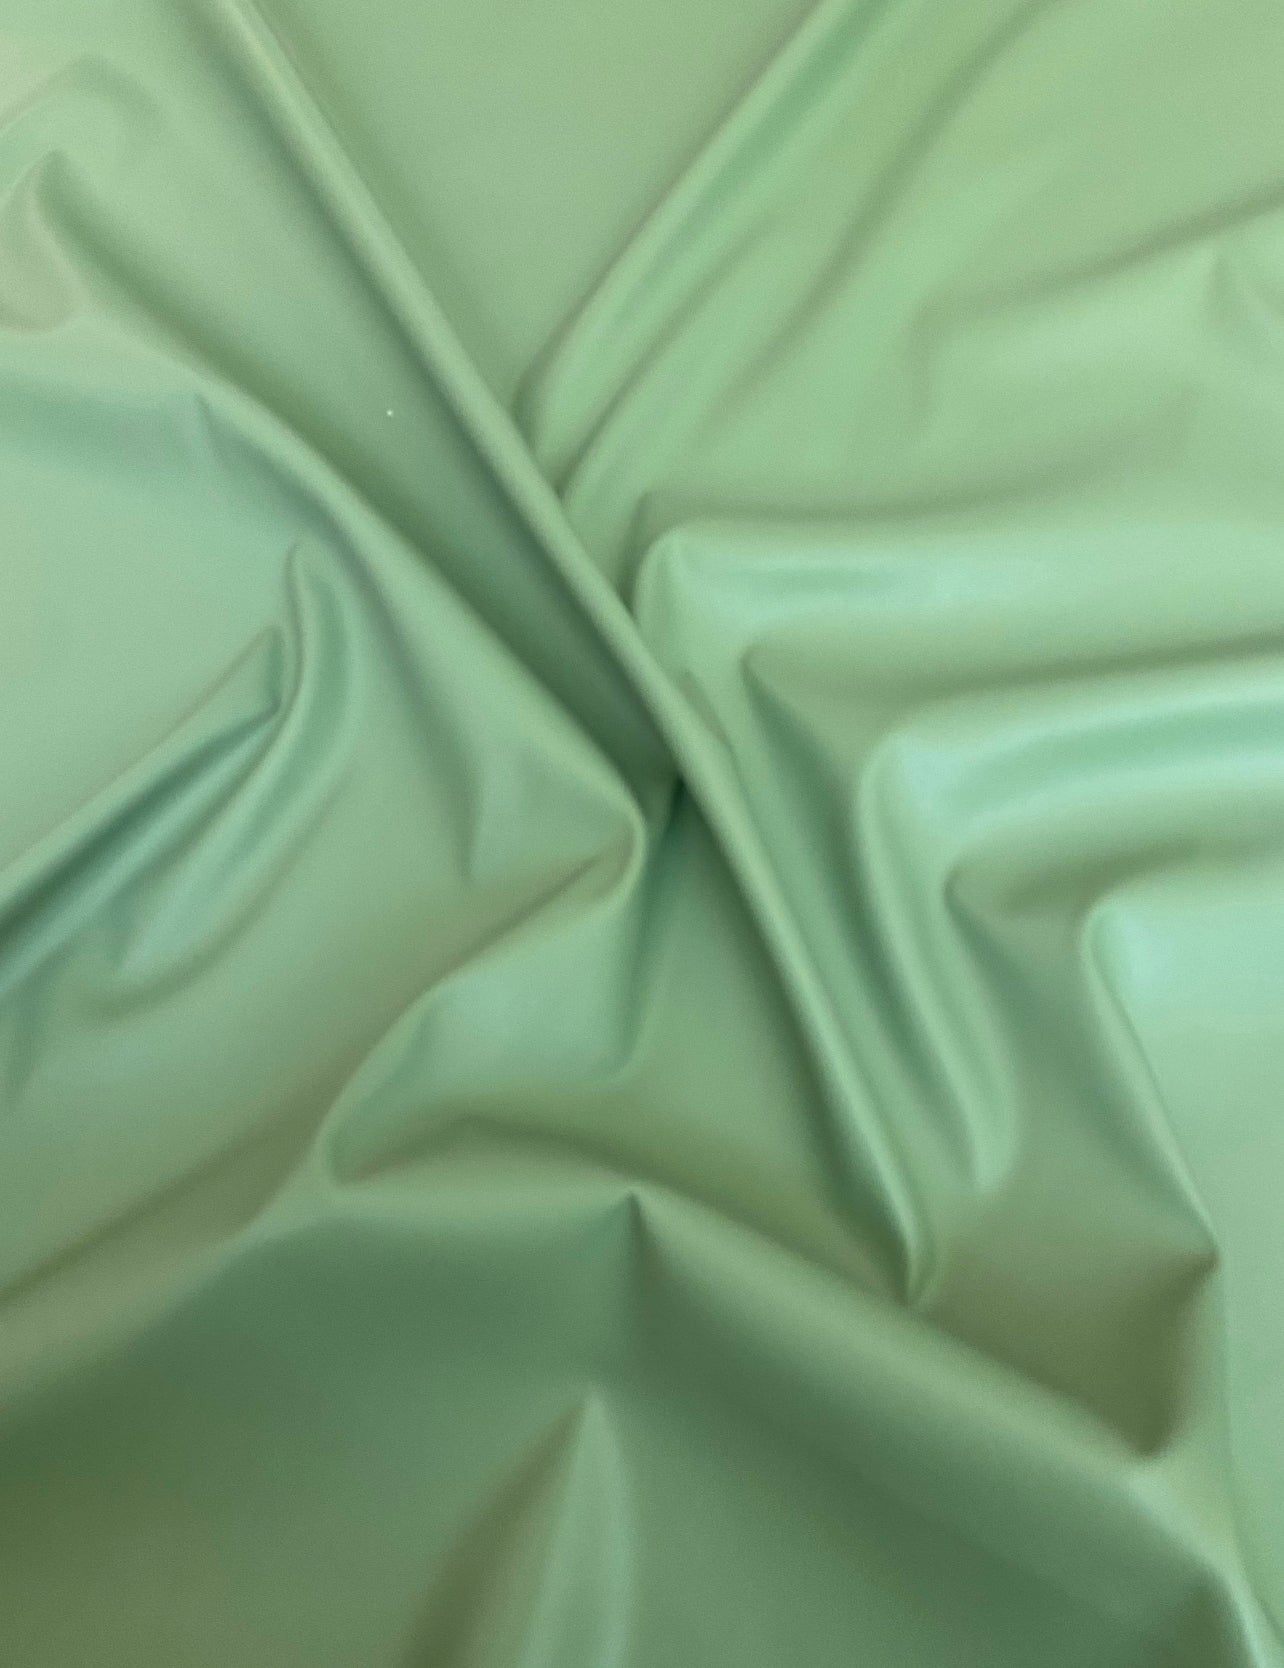 sage green stretch Faux Leather, light green Faux Leather, Faux Leather for jackets, Faux Leather for bags, Faux Leather on discount, Faux Leather on sale, premium Faux Leather, dark green Faux Leather, green Faux Leather, Faux Leather for tops, Faux Leather for leggings